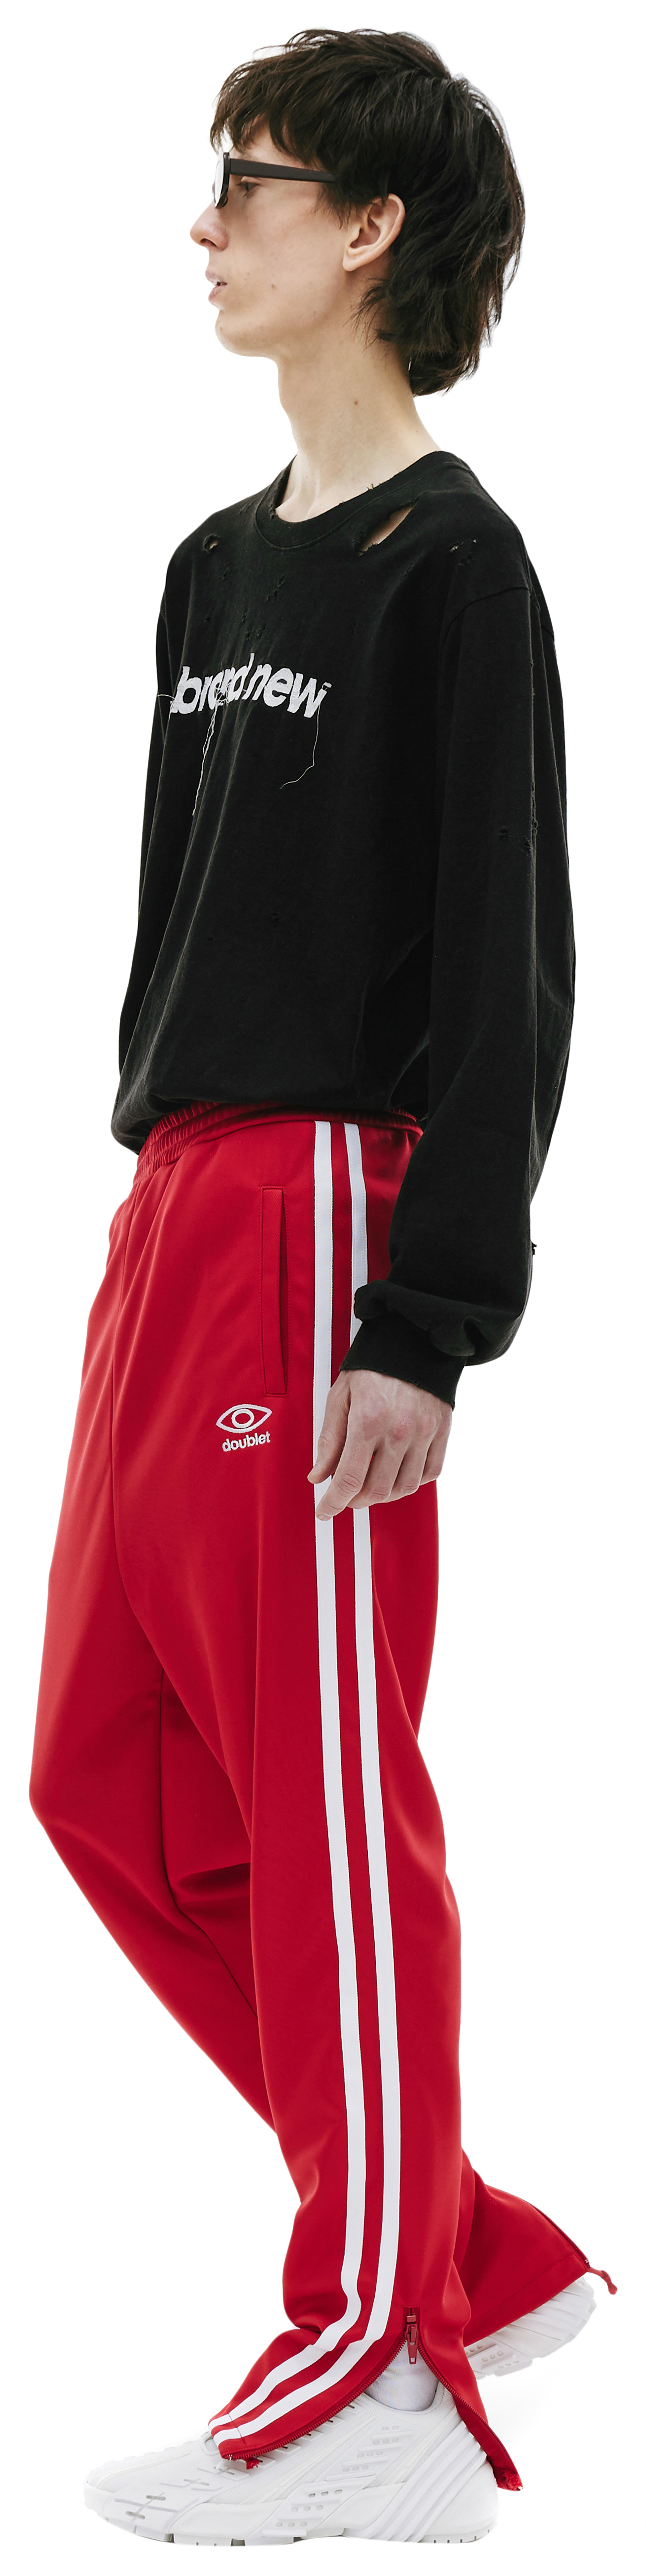 Buy Doublet men red invisible track pants for $246 online on SV77 